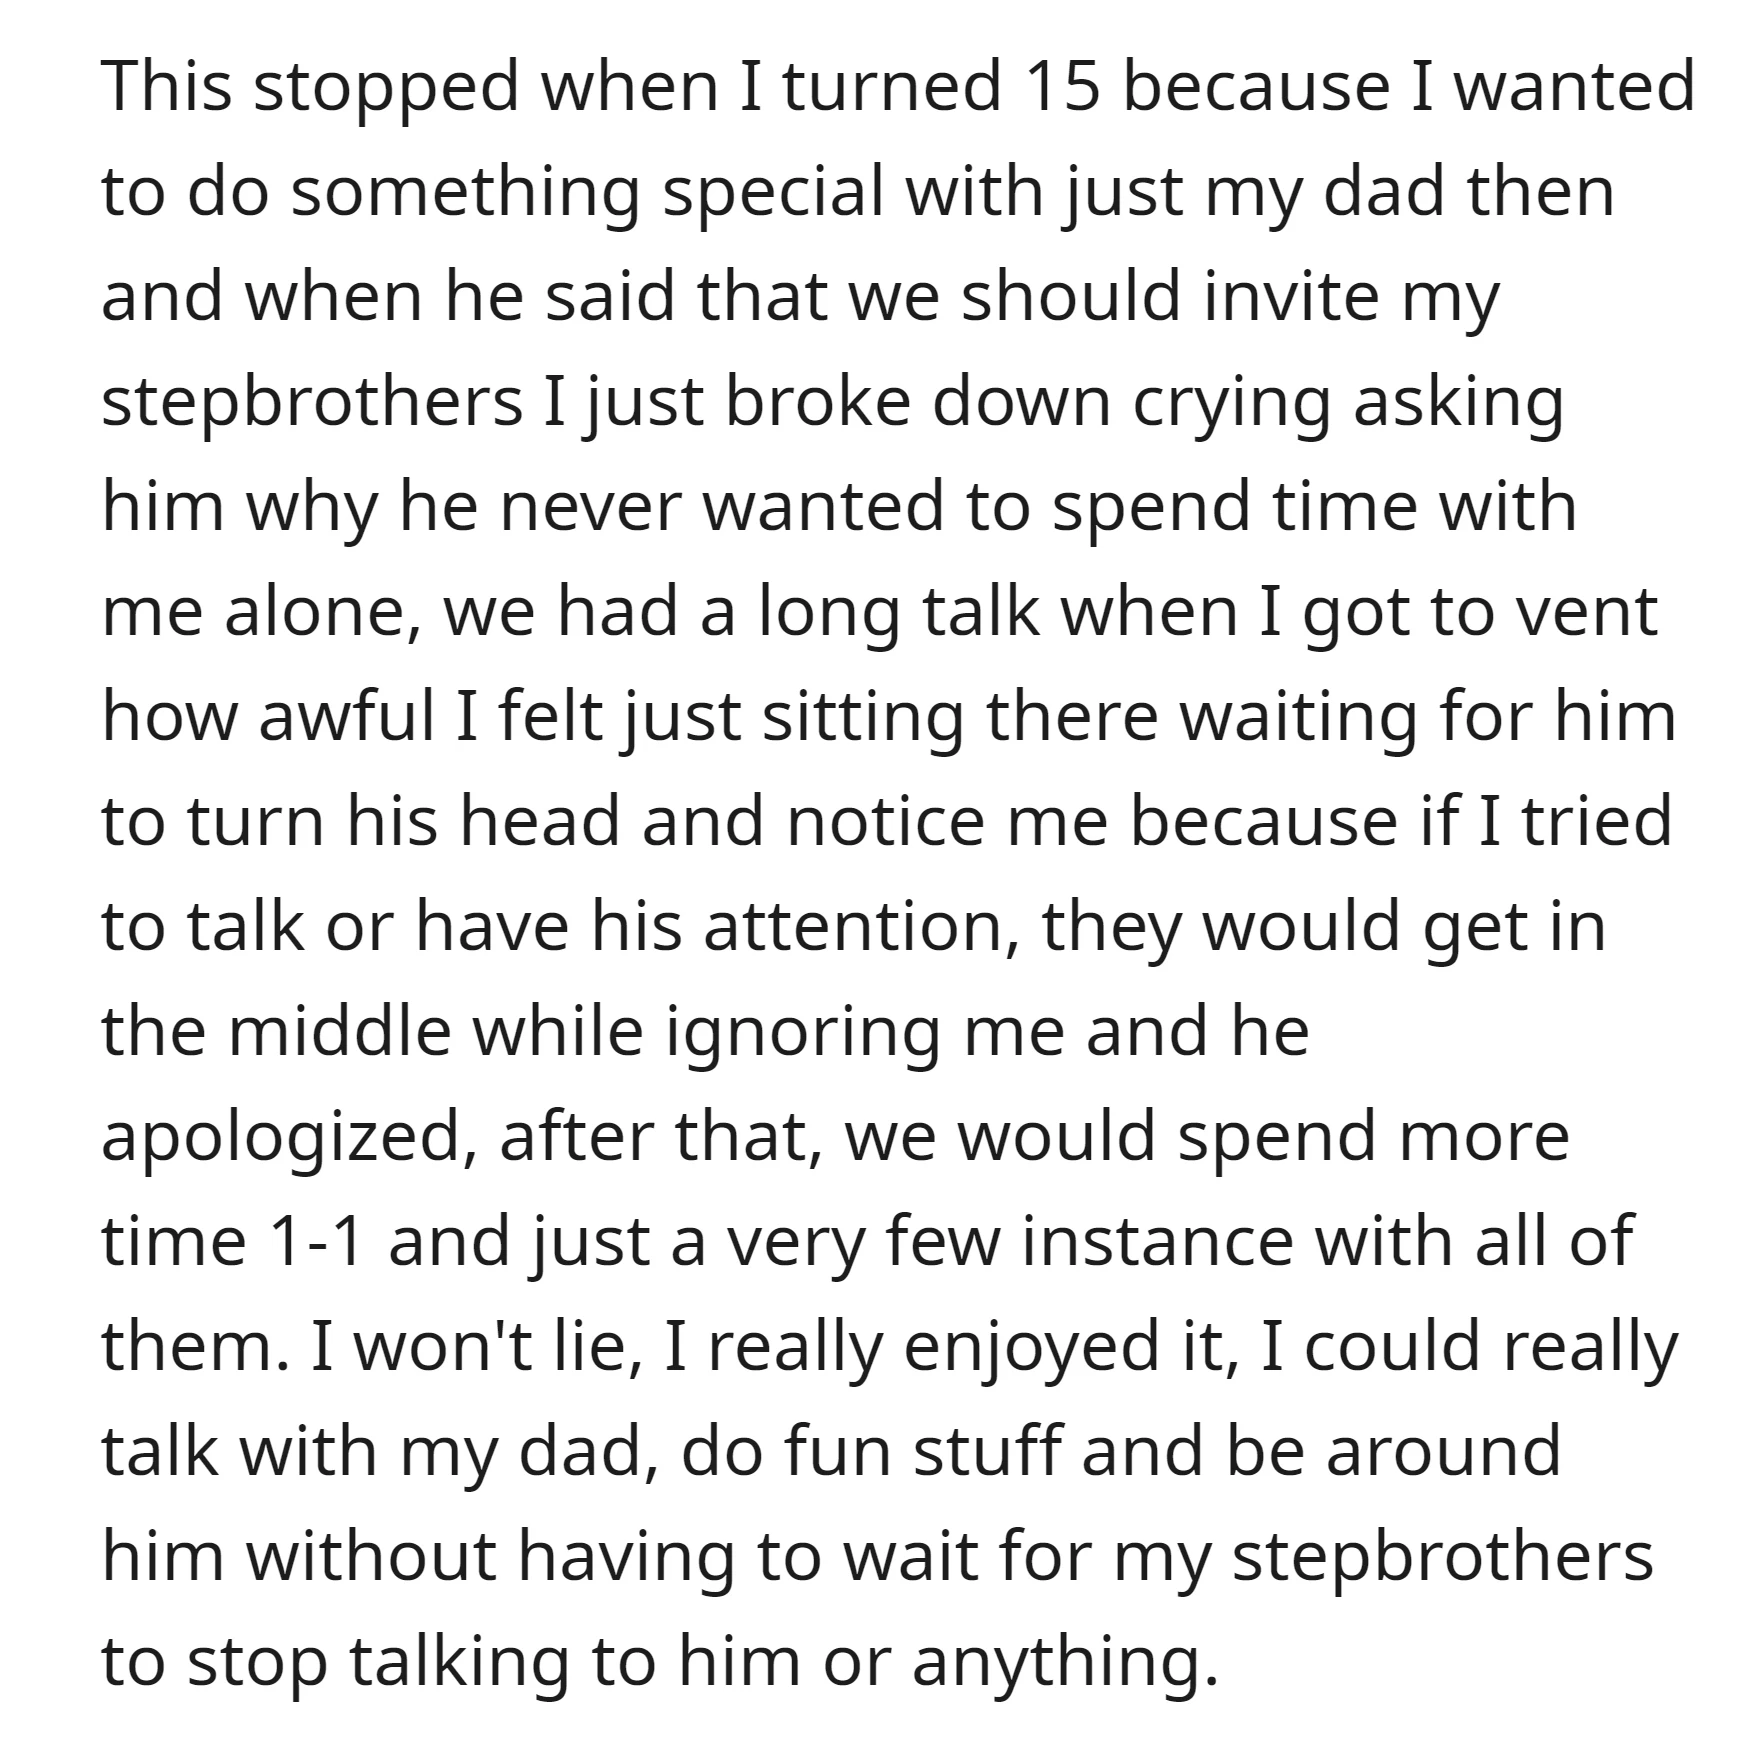 OP expressed her feelings to her dad about feeling neglected